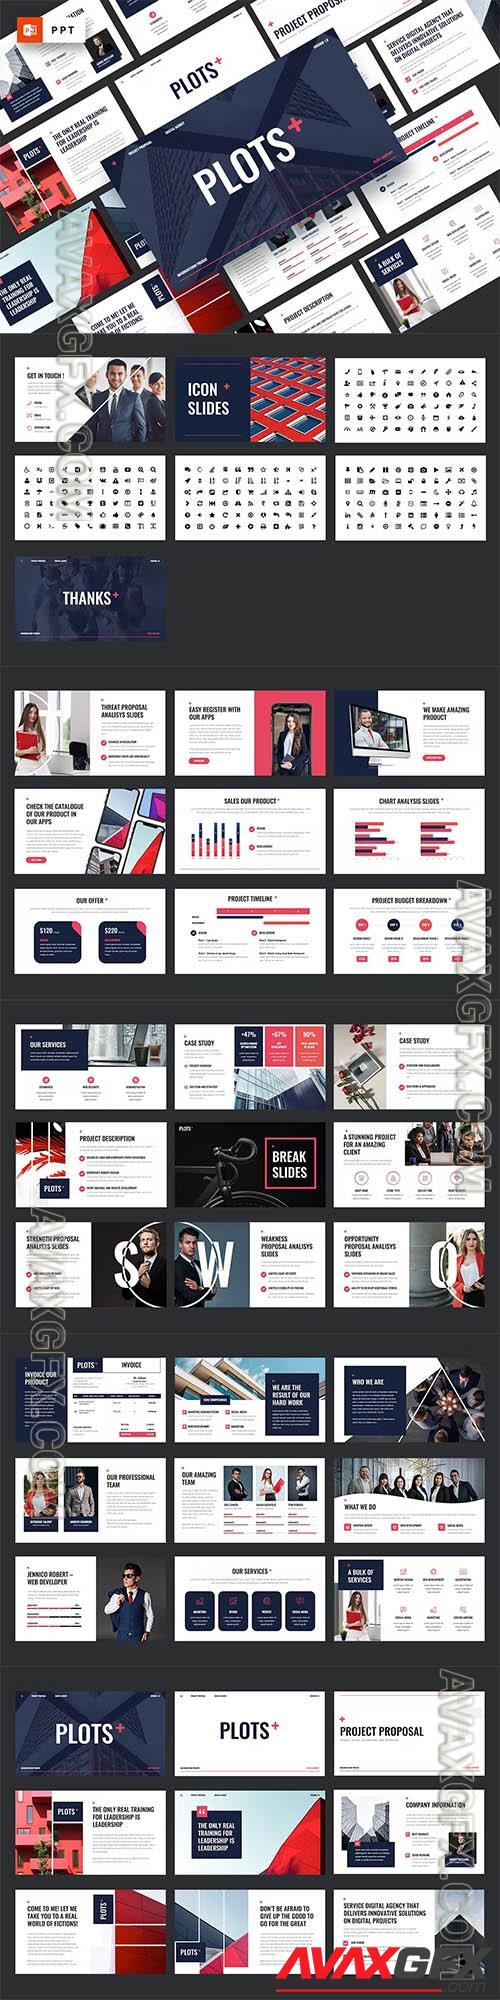 PLOTS - Project Proposal Powerpoint Template